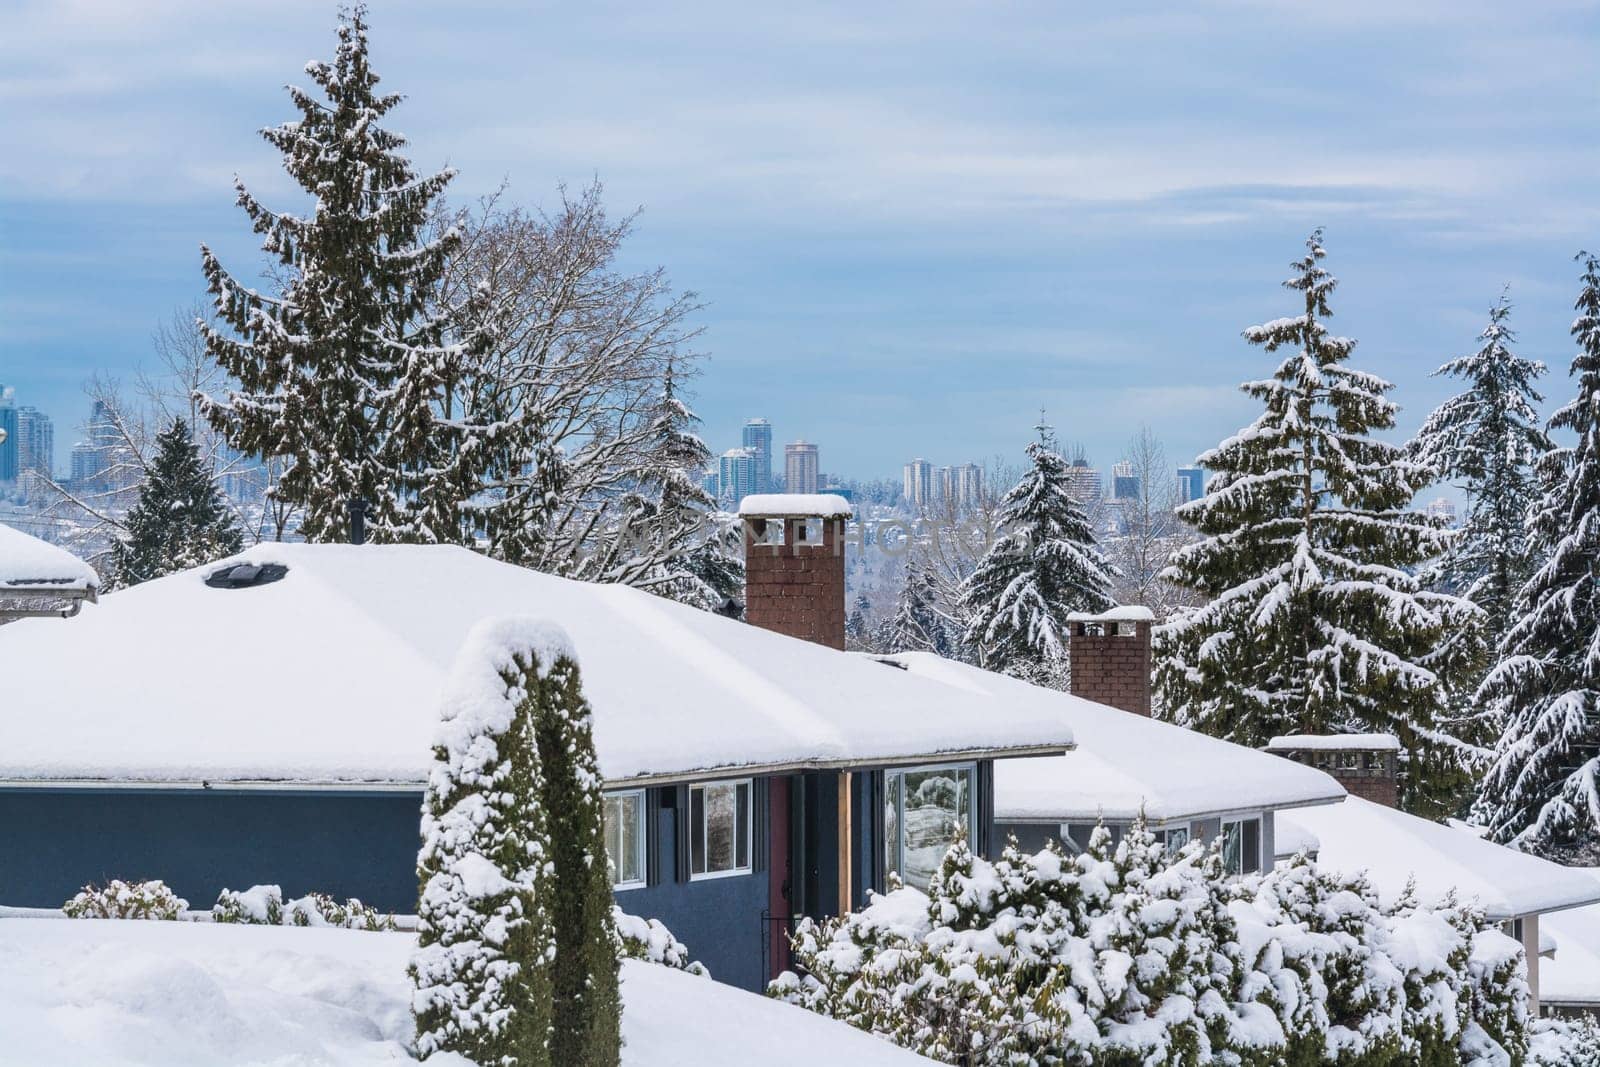 Street of residential houses in suburban of Vancouver. Family houses in snow on winter season